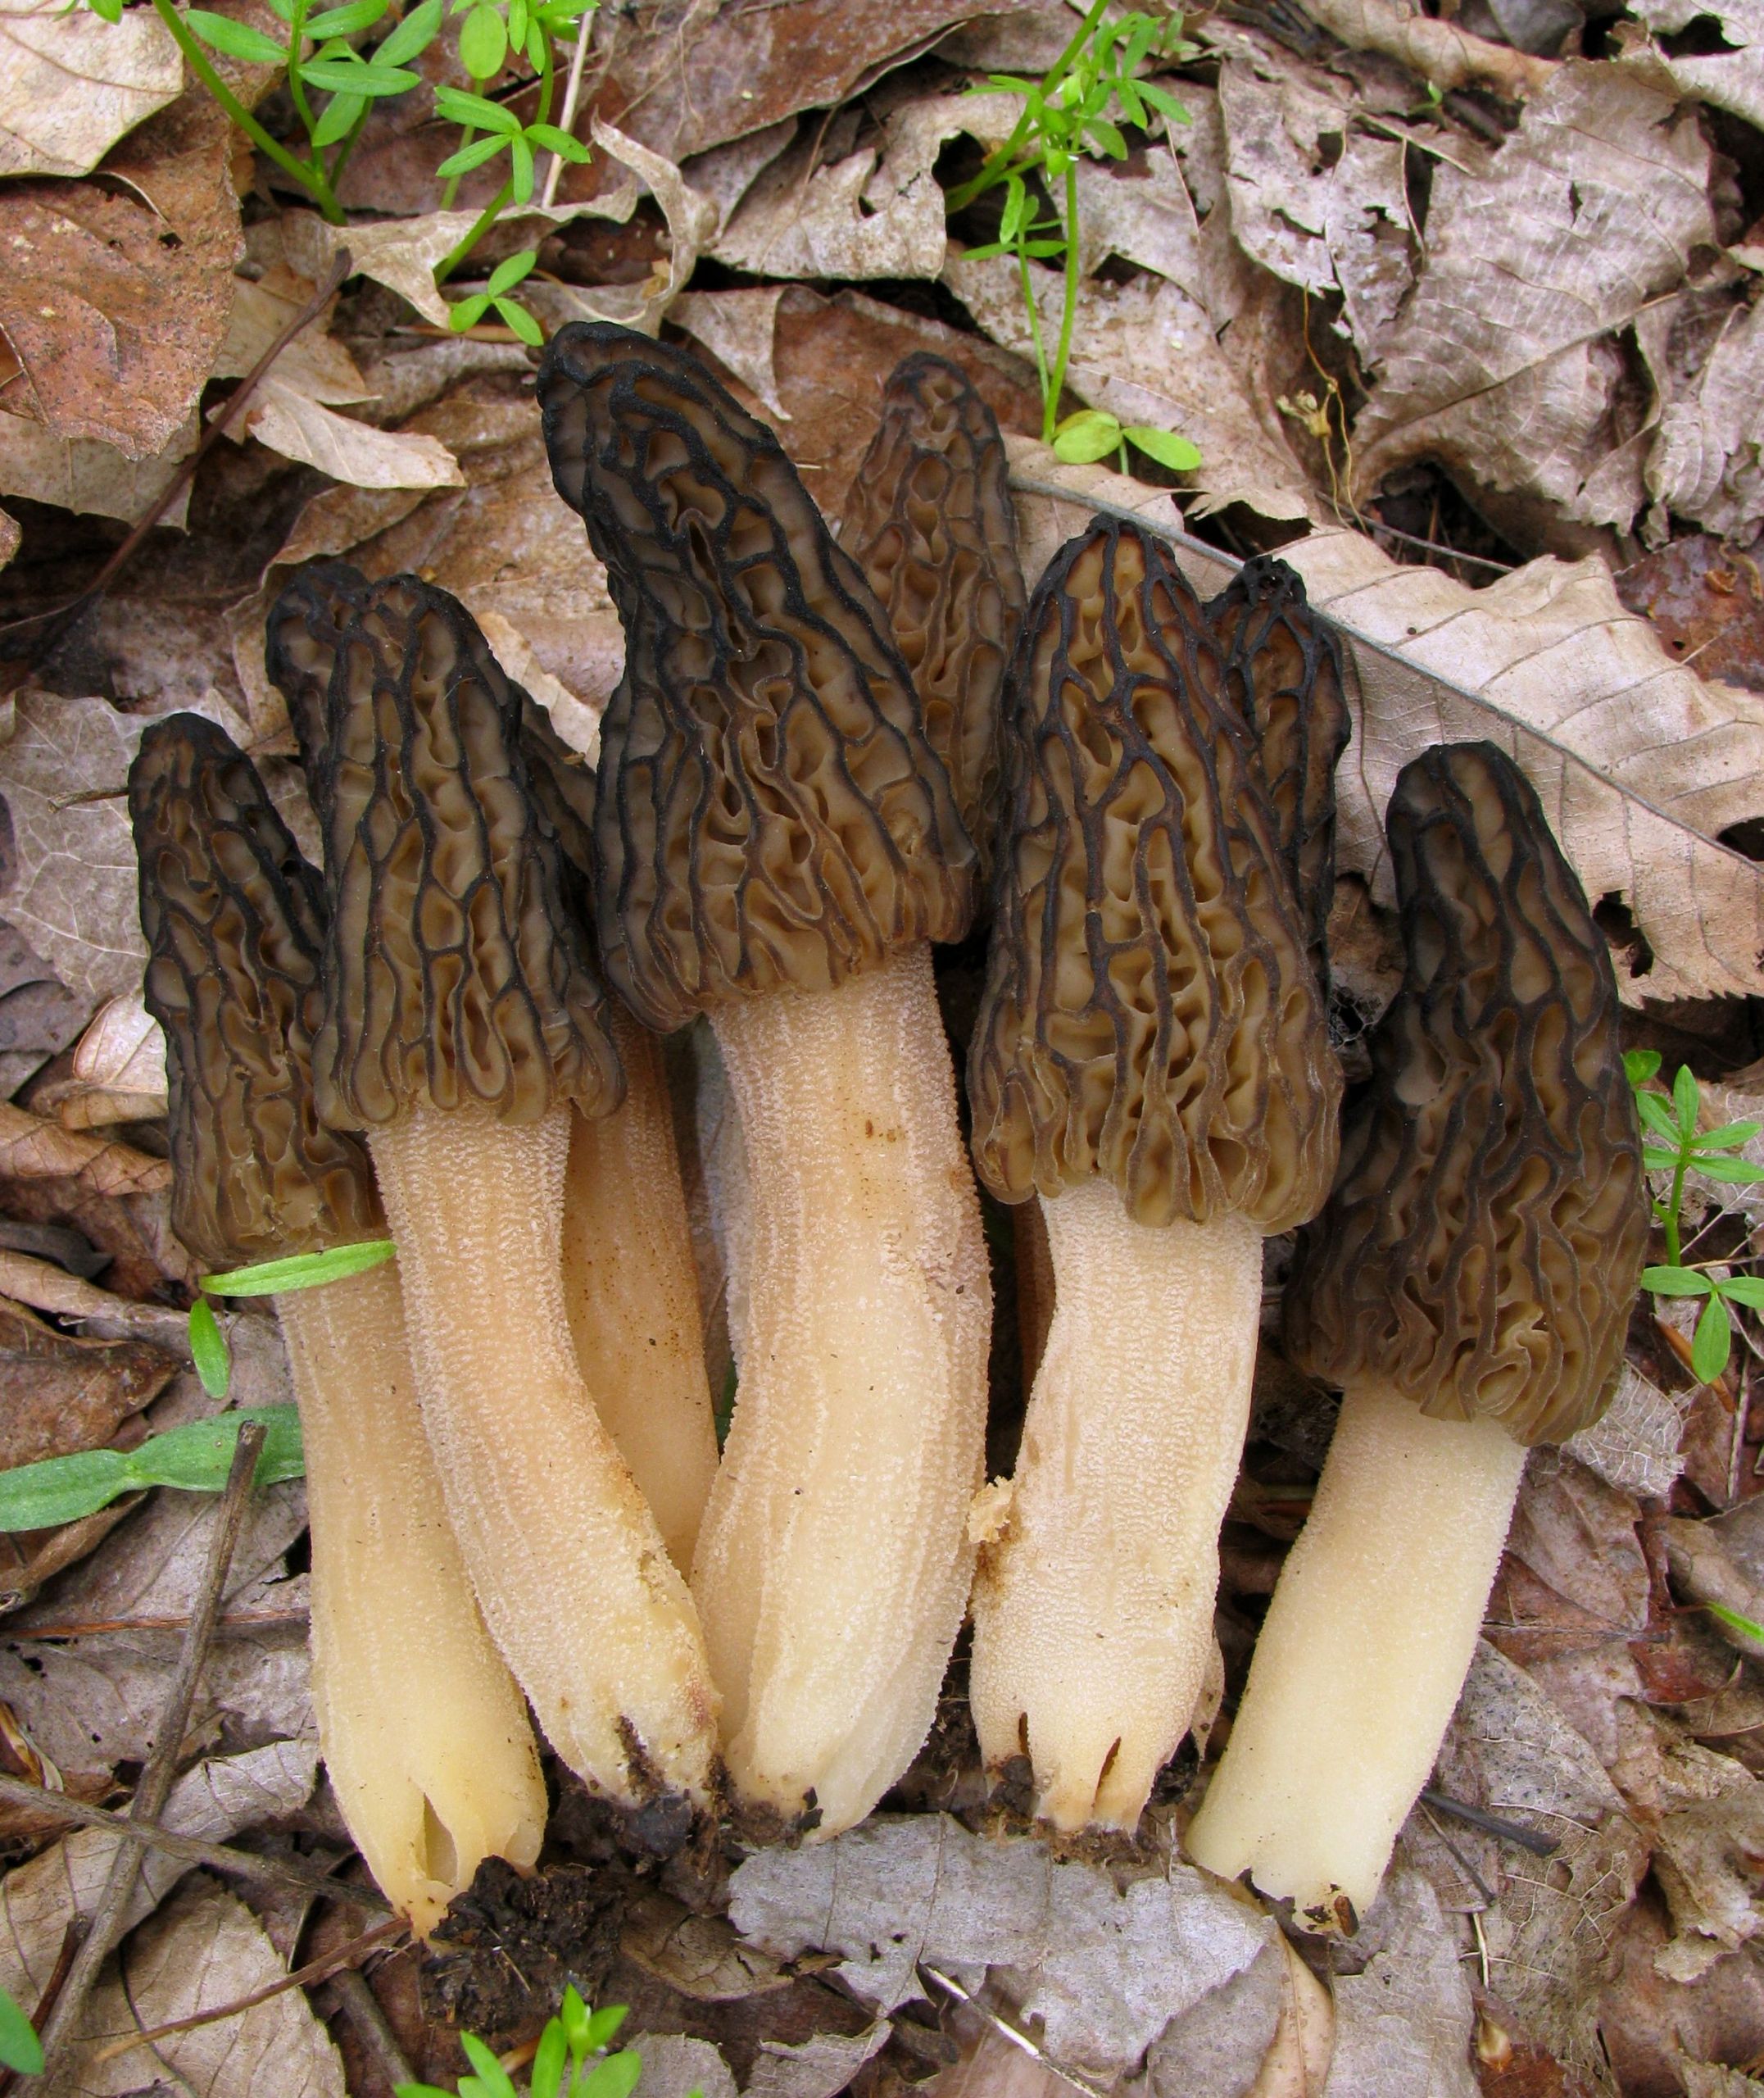 Grow Your Own Morel Mushrooms
 Would You Like to Grow Your Own BLACK MOREL Mushrooms